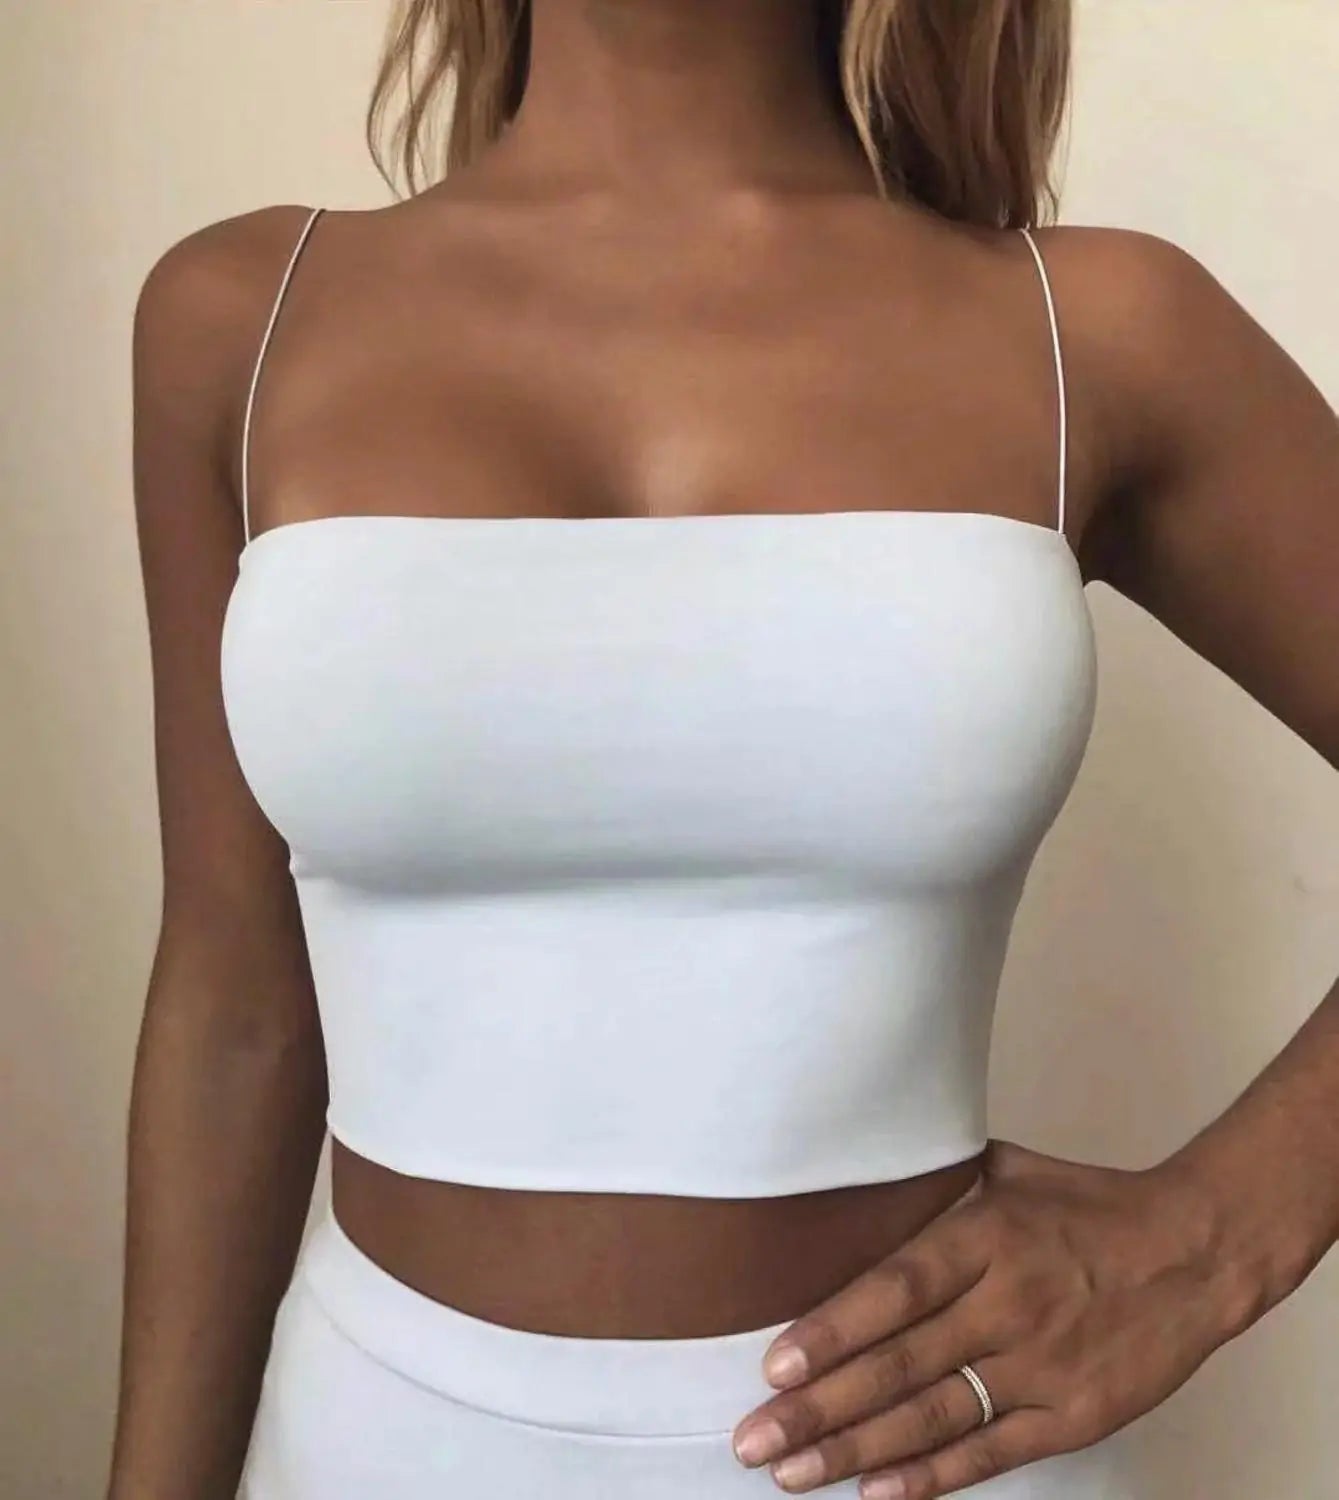 Introducing our latest summer essential: the Women's Summer Crop Top